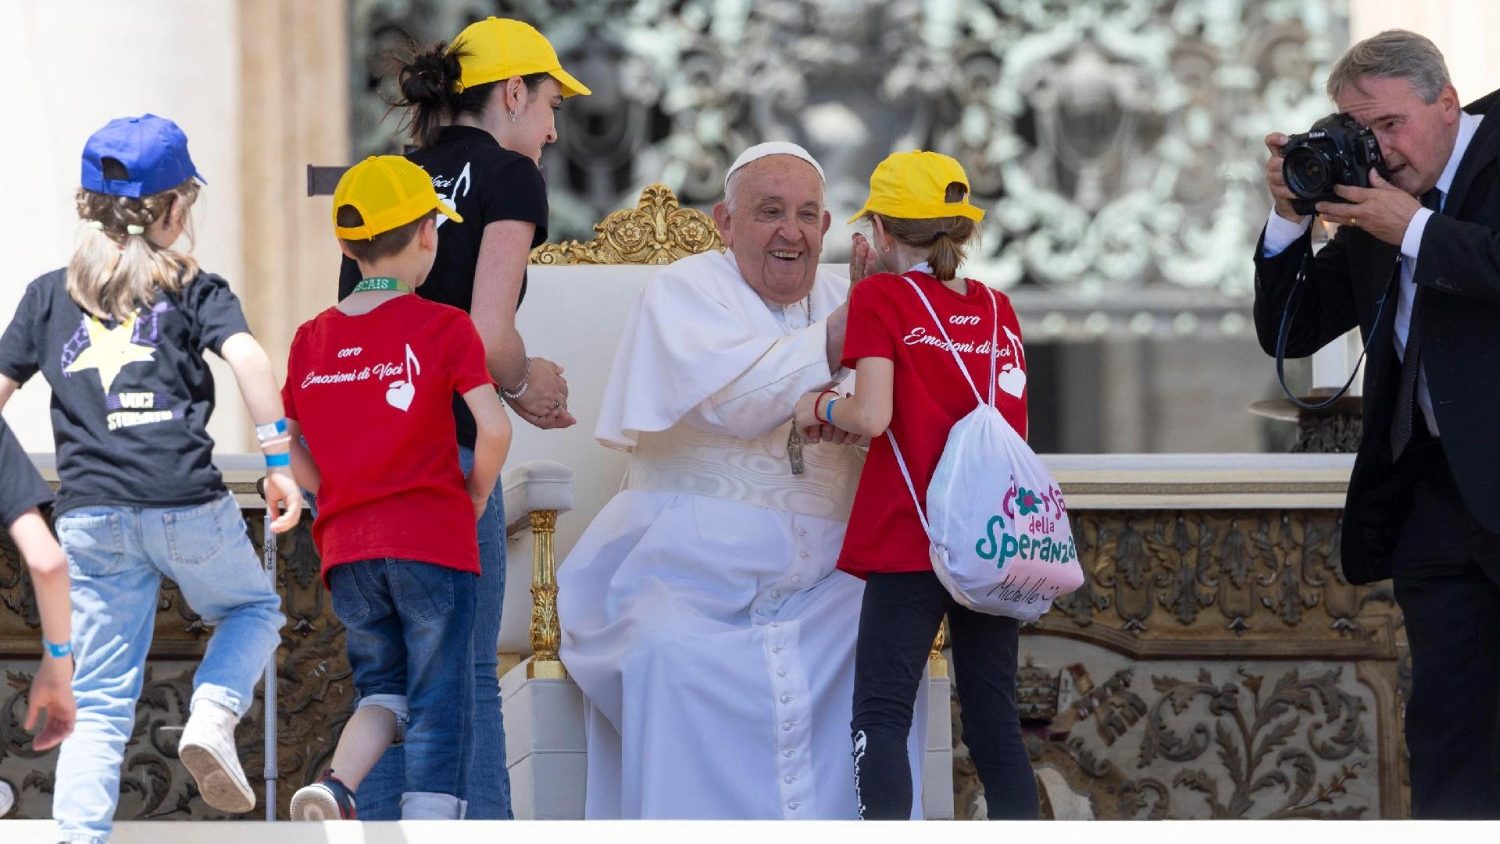 The Pope at Mass with children: “The Holy Spirit is with us in life”